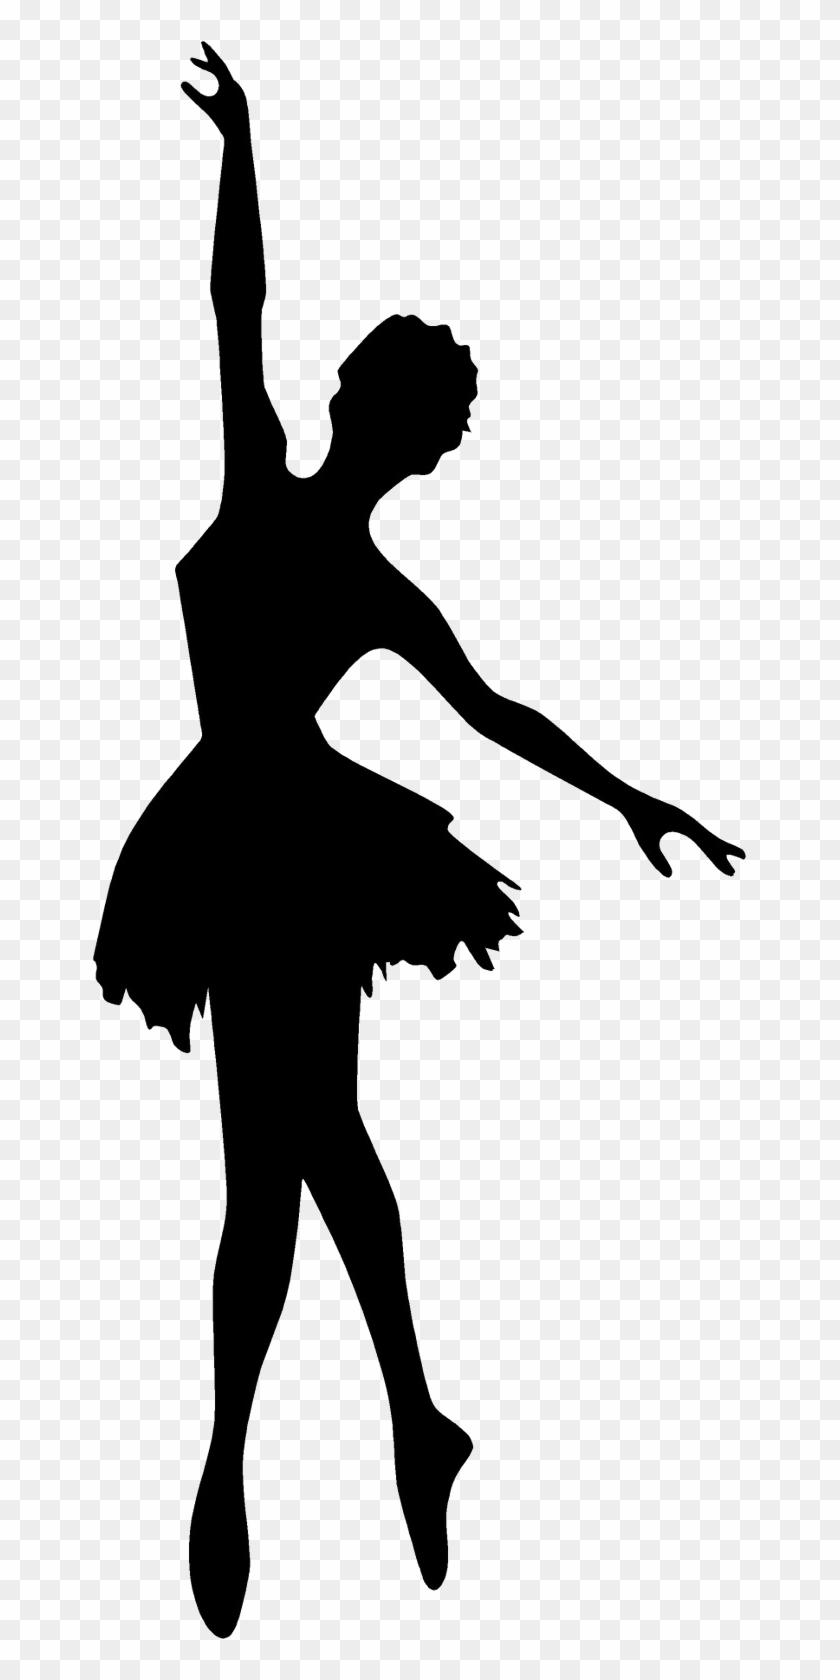 Ballet Dancer Silhouette Images - Free Ballet Silhouette Cliparts ...